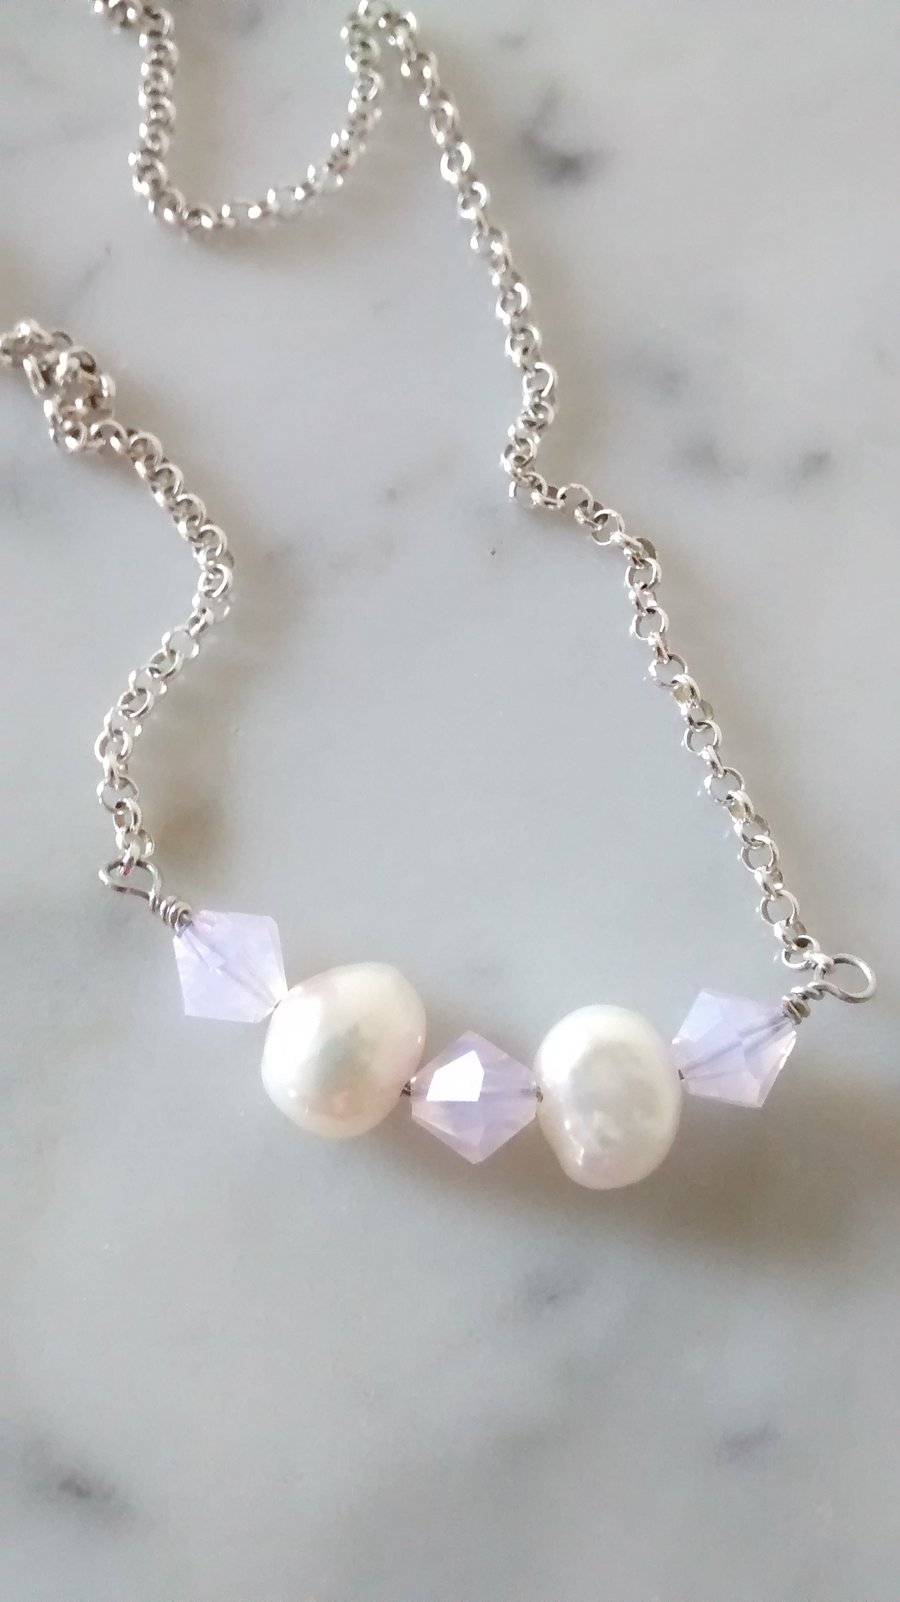 SALE - HALF PRIC -  PEARL  AND PINK OPAL NECKLACE - - BRIDE  - FREE UK SHIPPING 